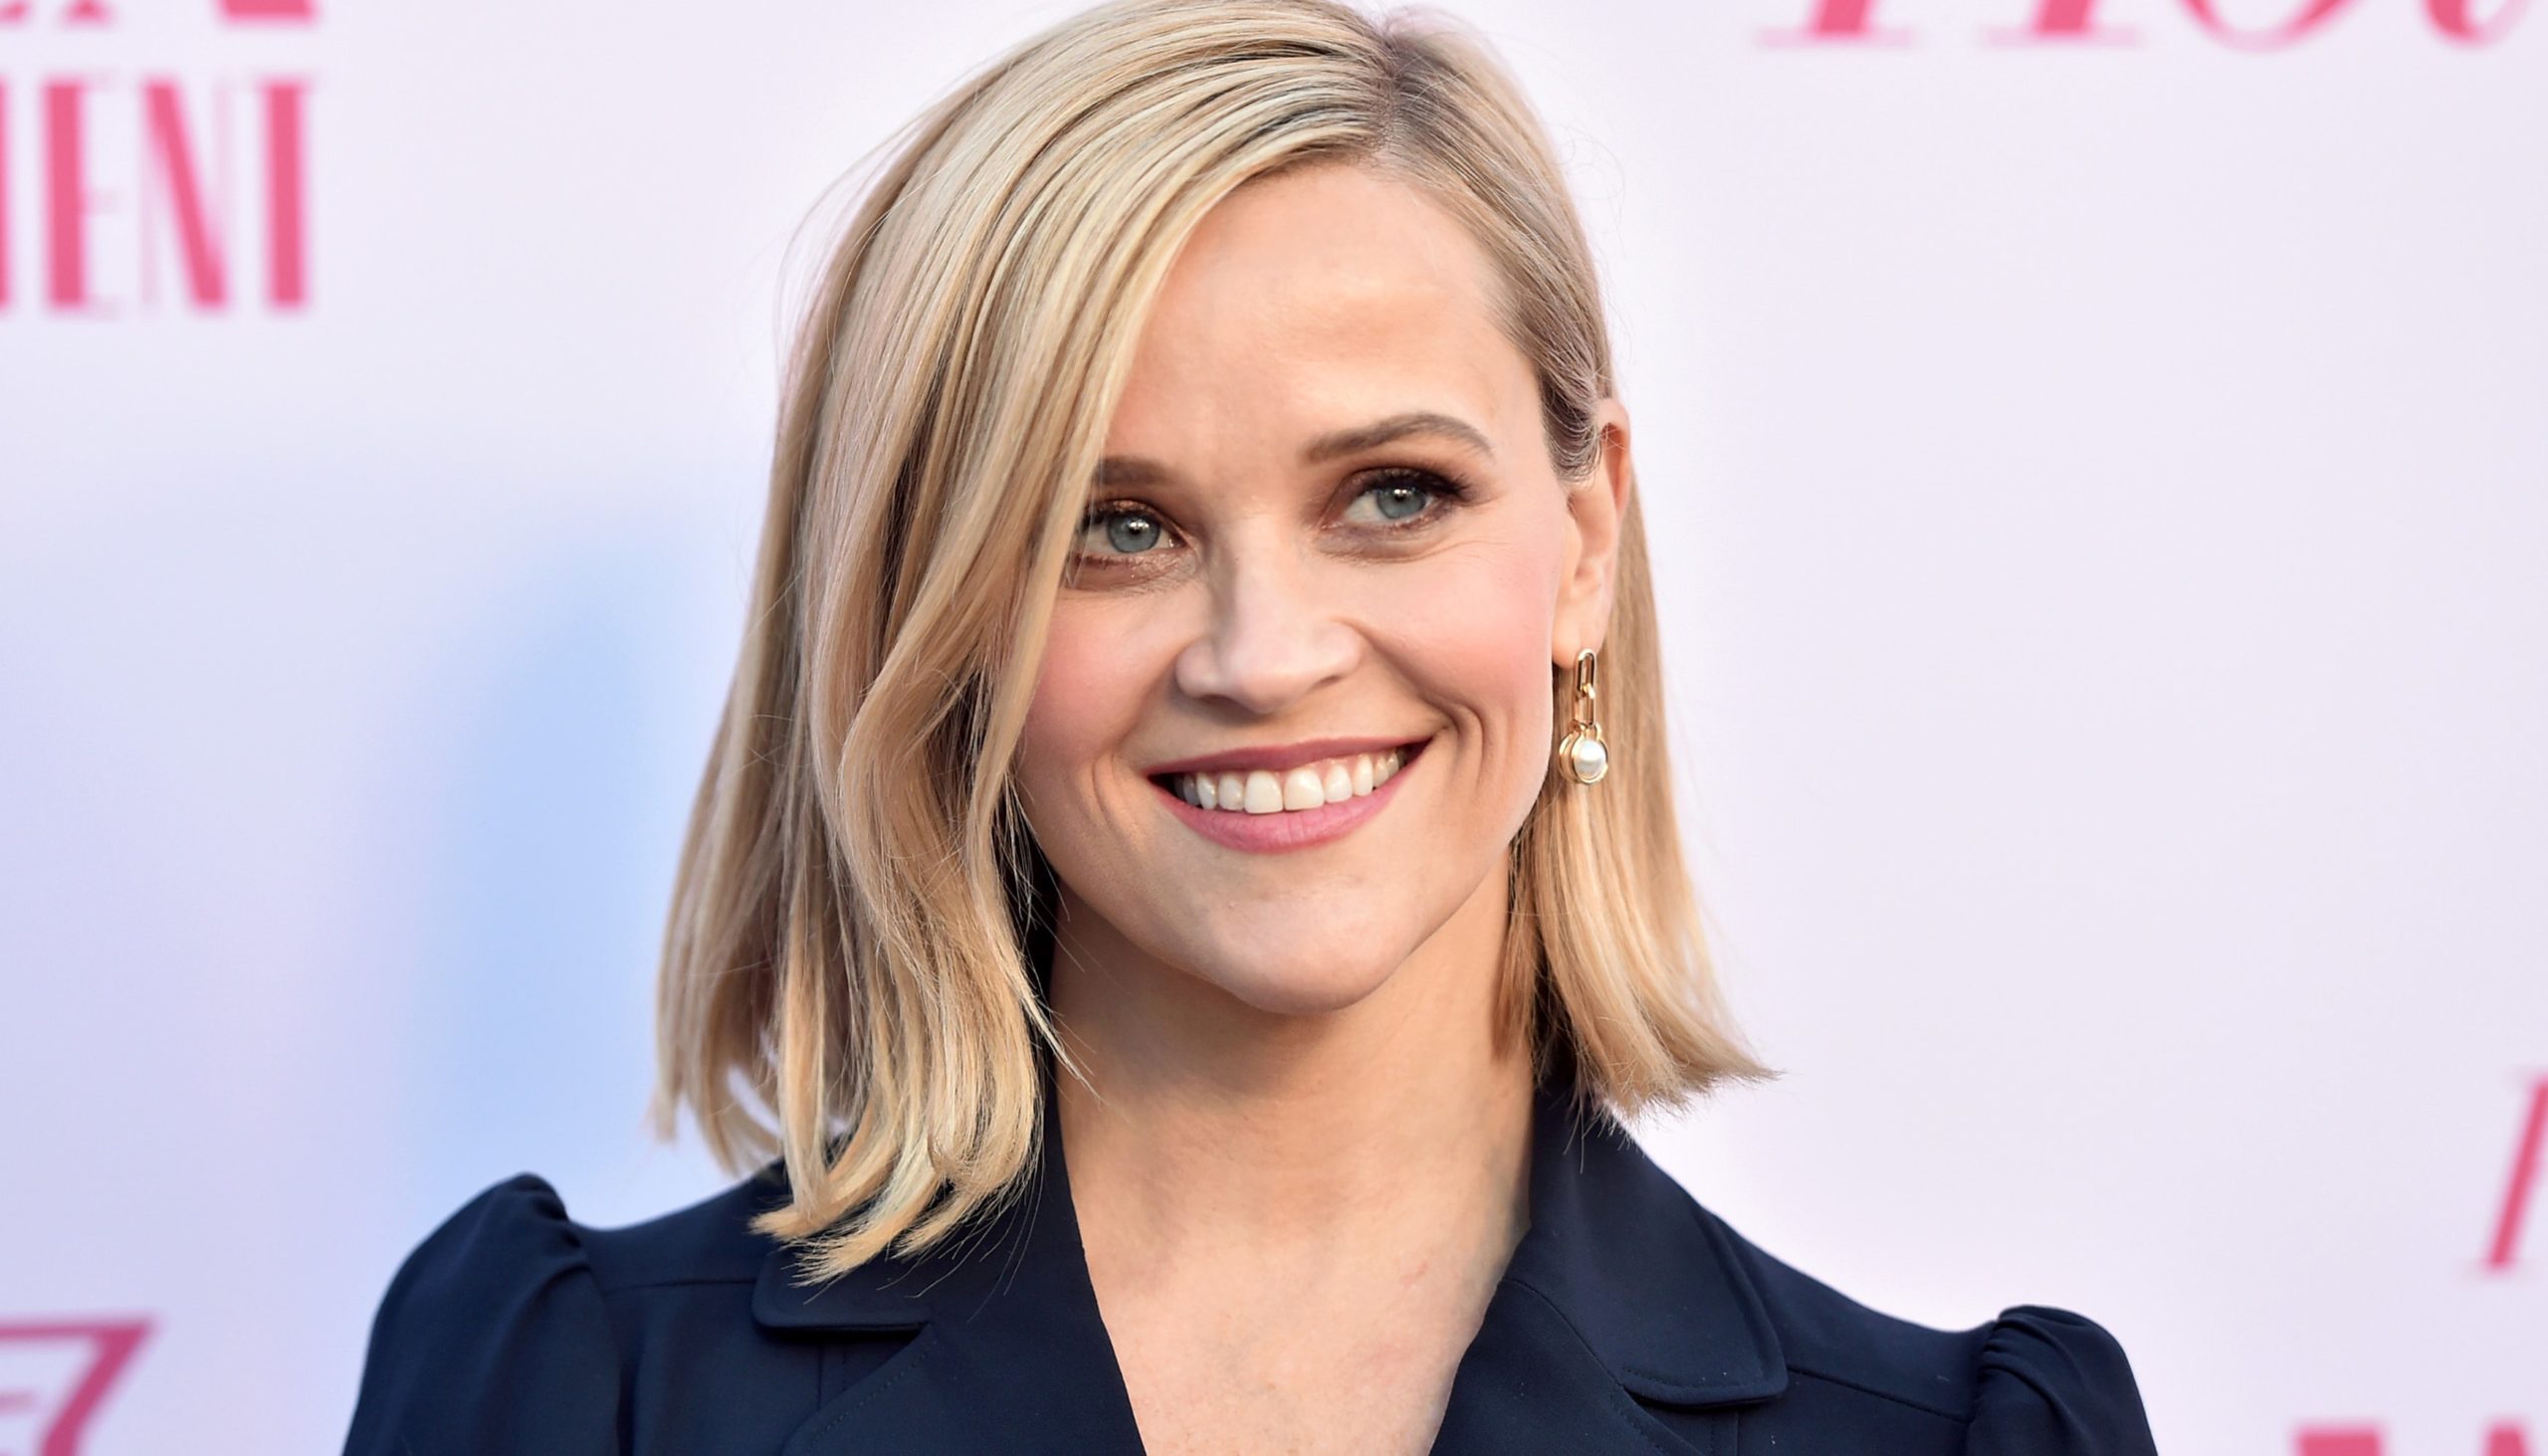 Reese Witherspoon Shared an Adorable 1996 Selfie With Paul Rudd